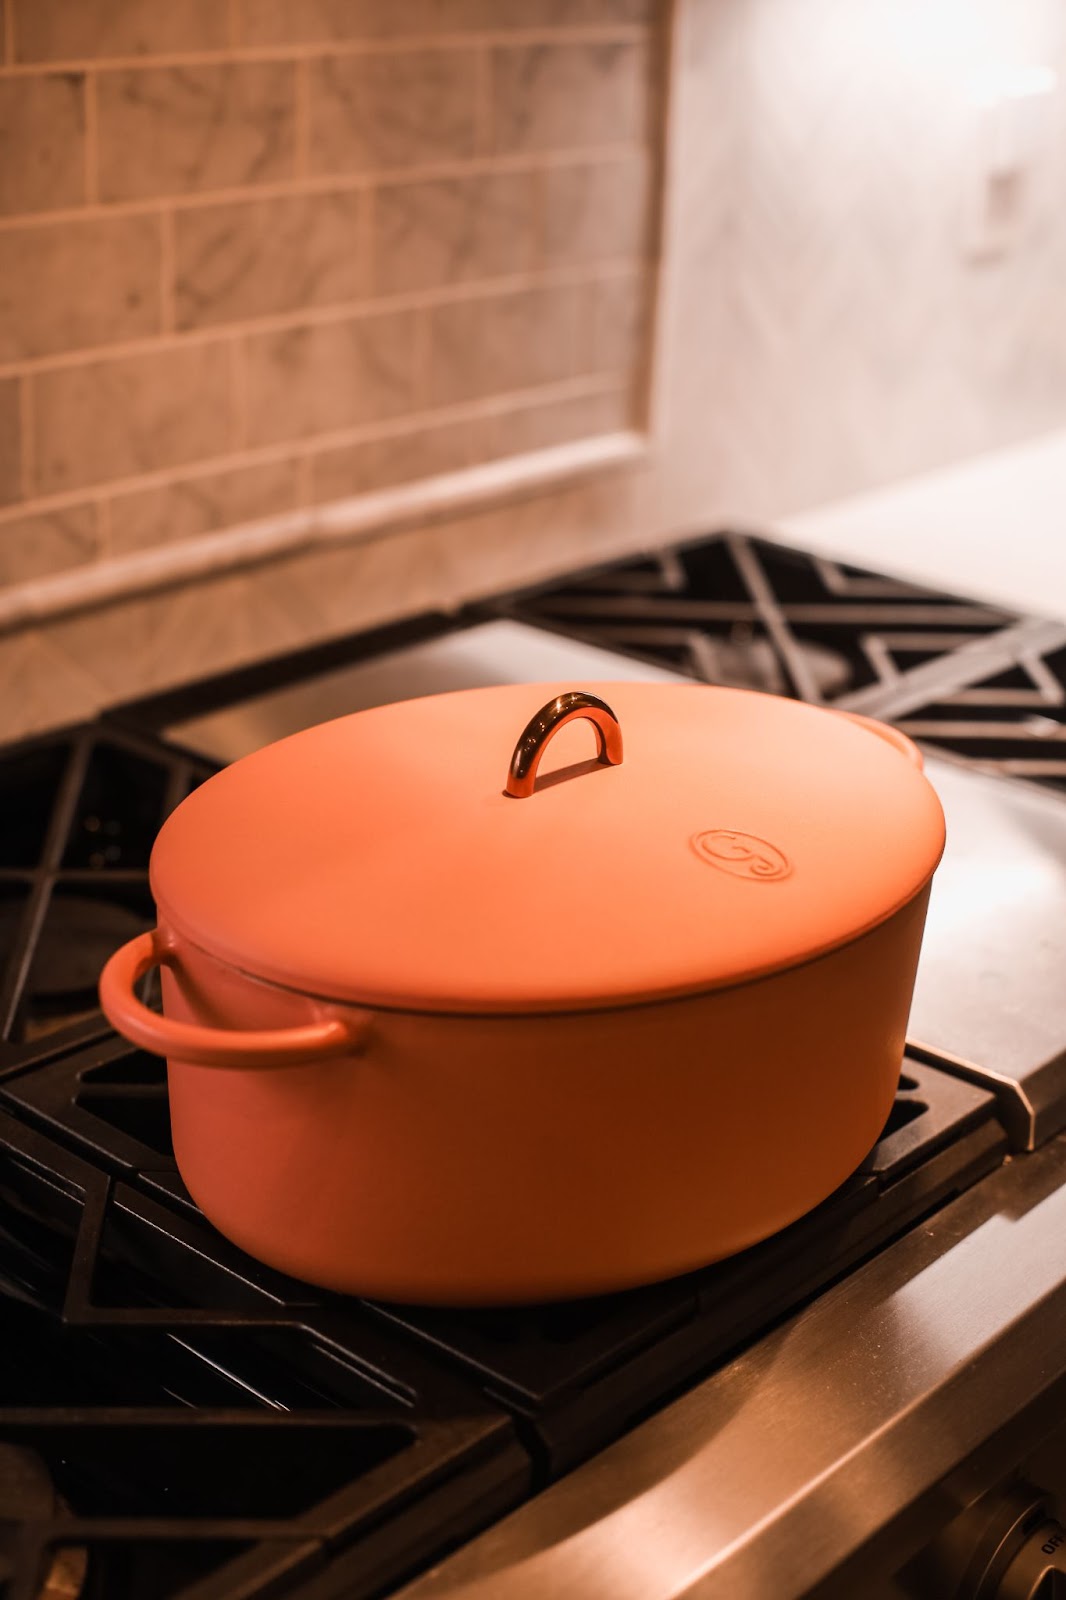 Great Jones Cookware Review 2021: Dutch Ovens, Stockpots & More